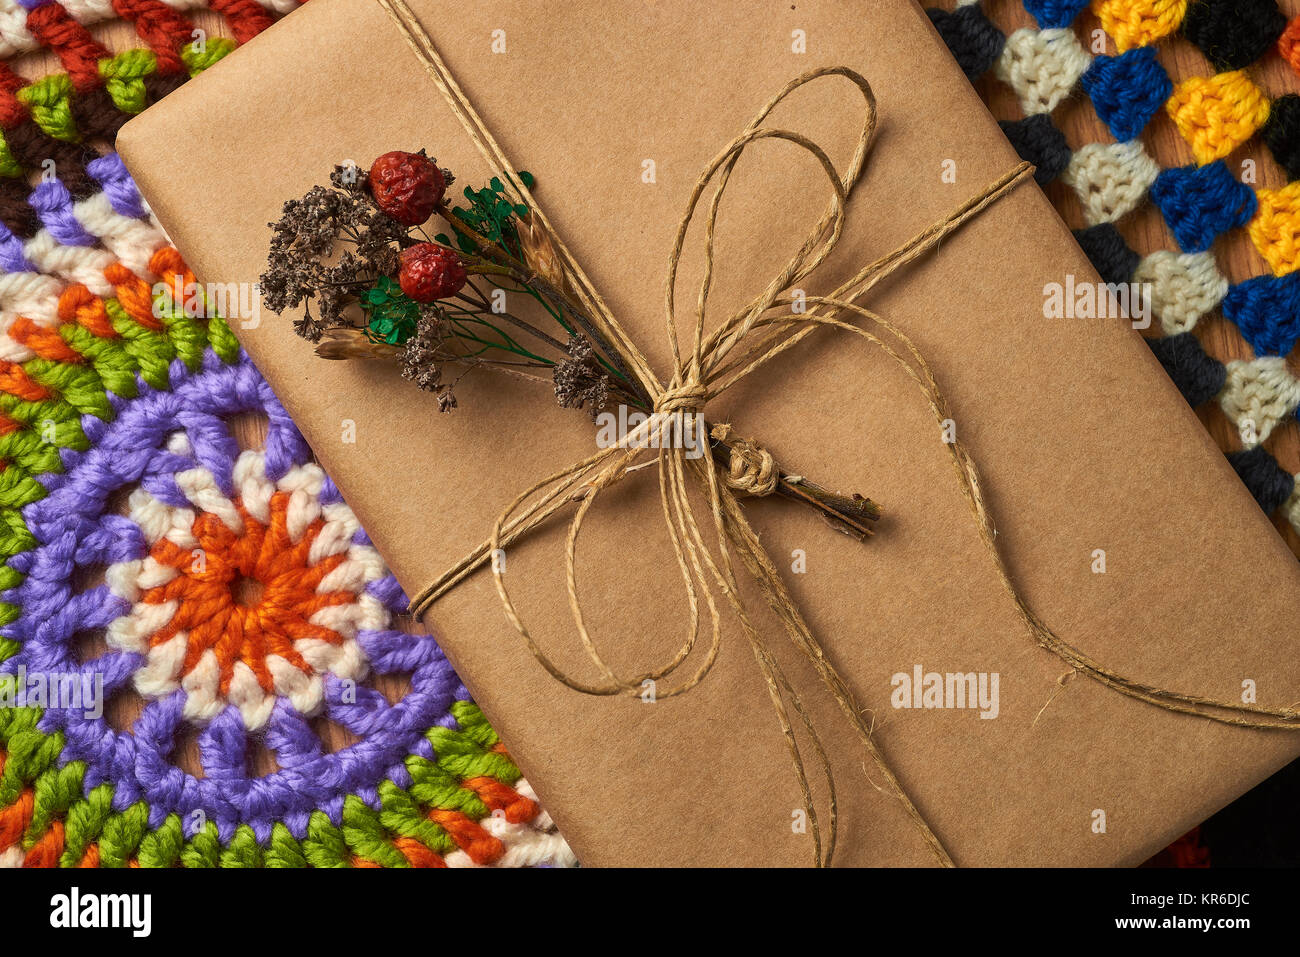 Wrapped book tied with brown paper thread with small dried bouquet of field plants is lying on the table on two colorful knitted napkins. Stock Photo